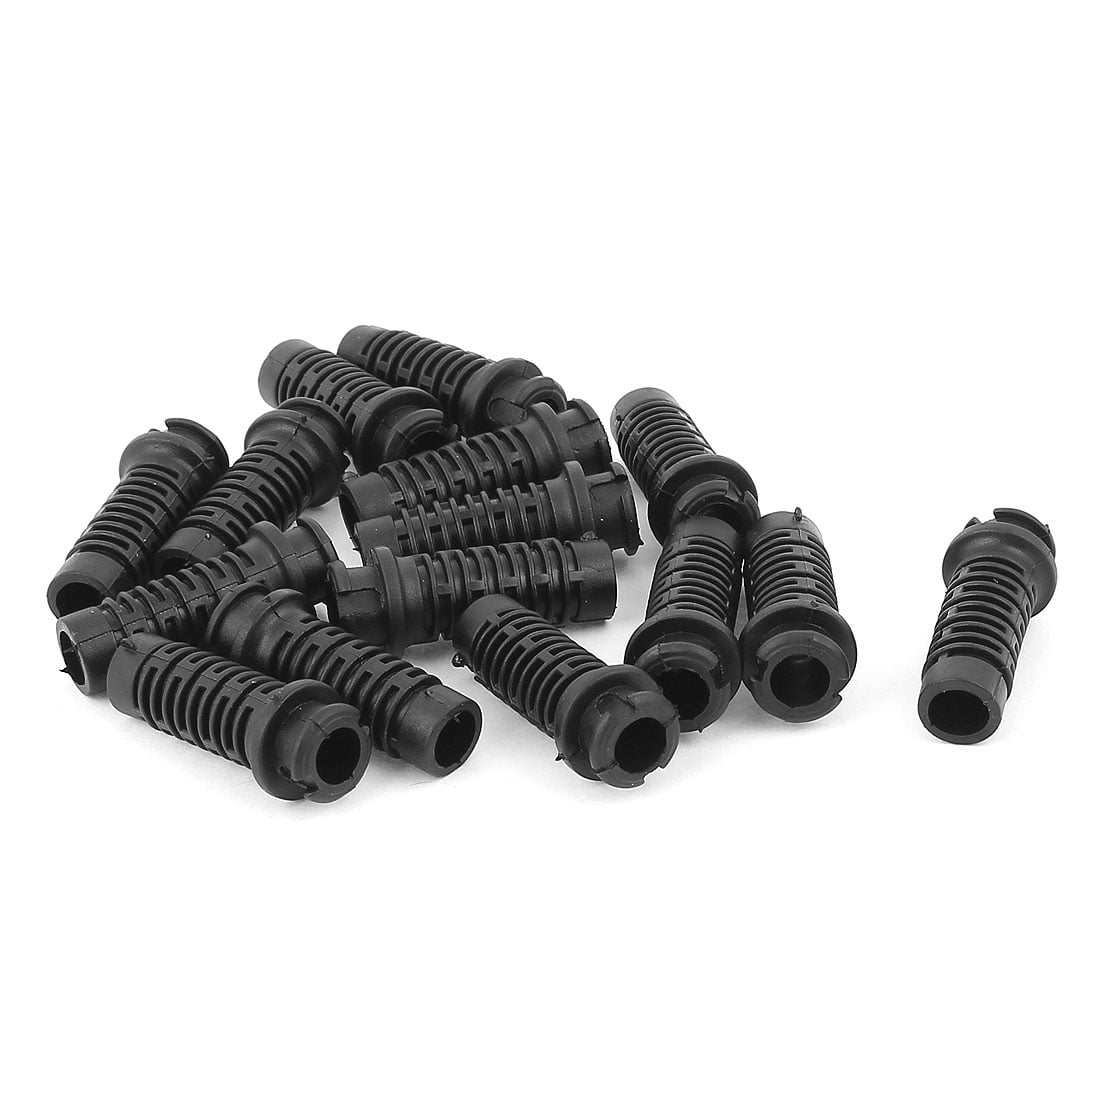 uxcell 15 Pcs Rubber Strain Relief Cord Boot Guard Wire Cable Sleeve Hose 27mm x 7mm a16051100ux0205 